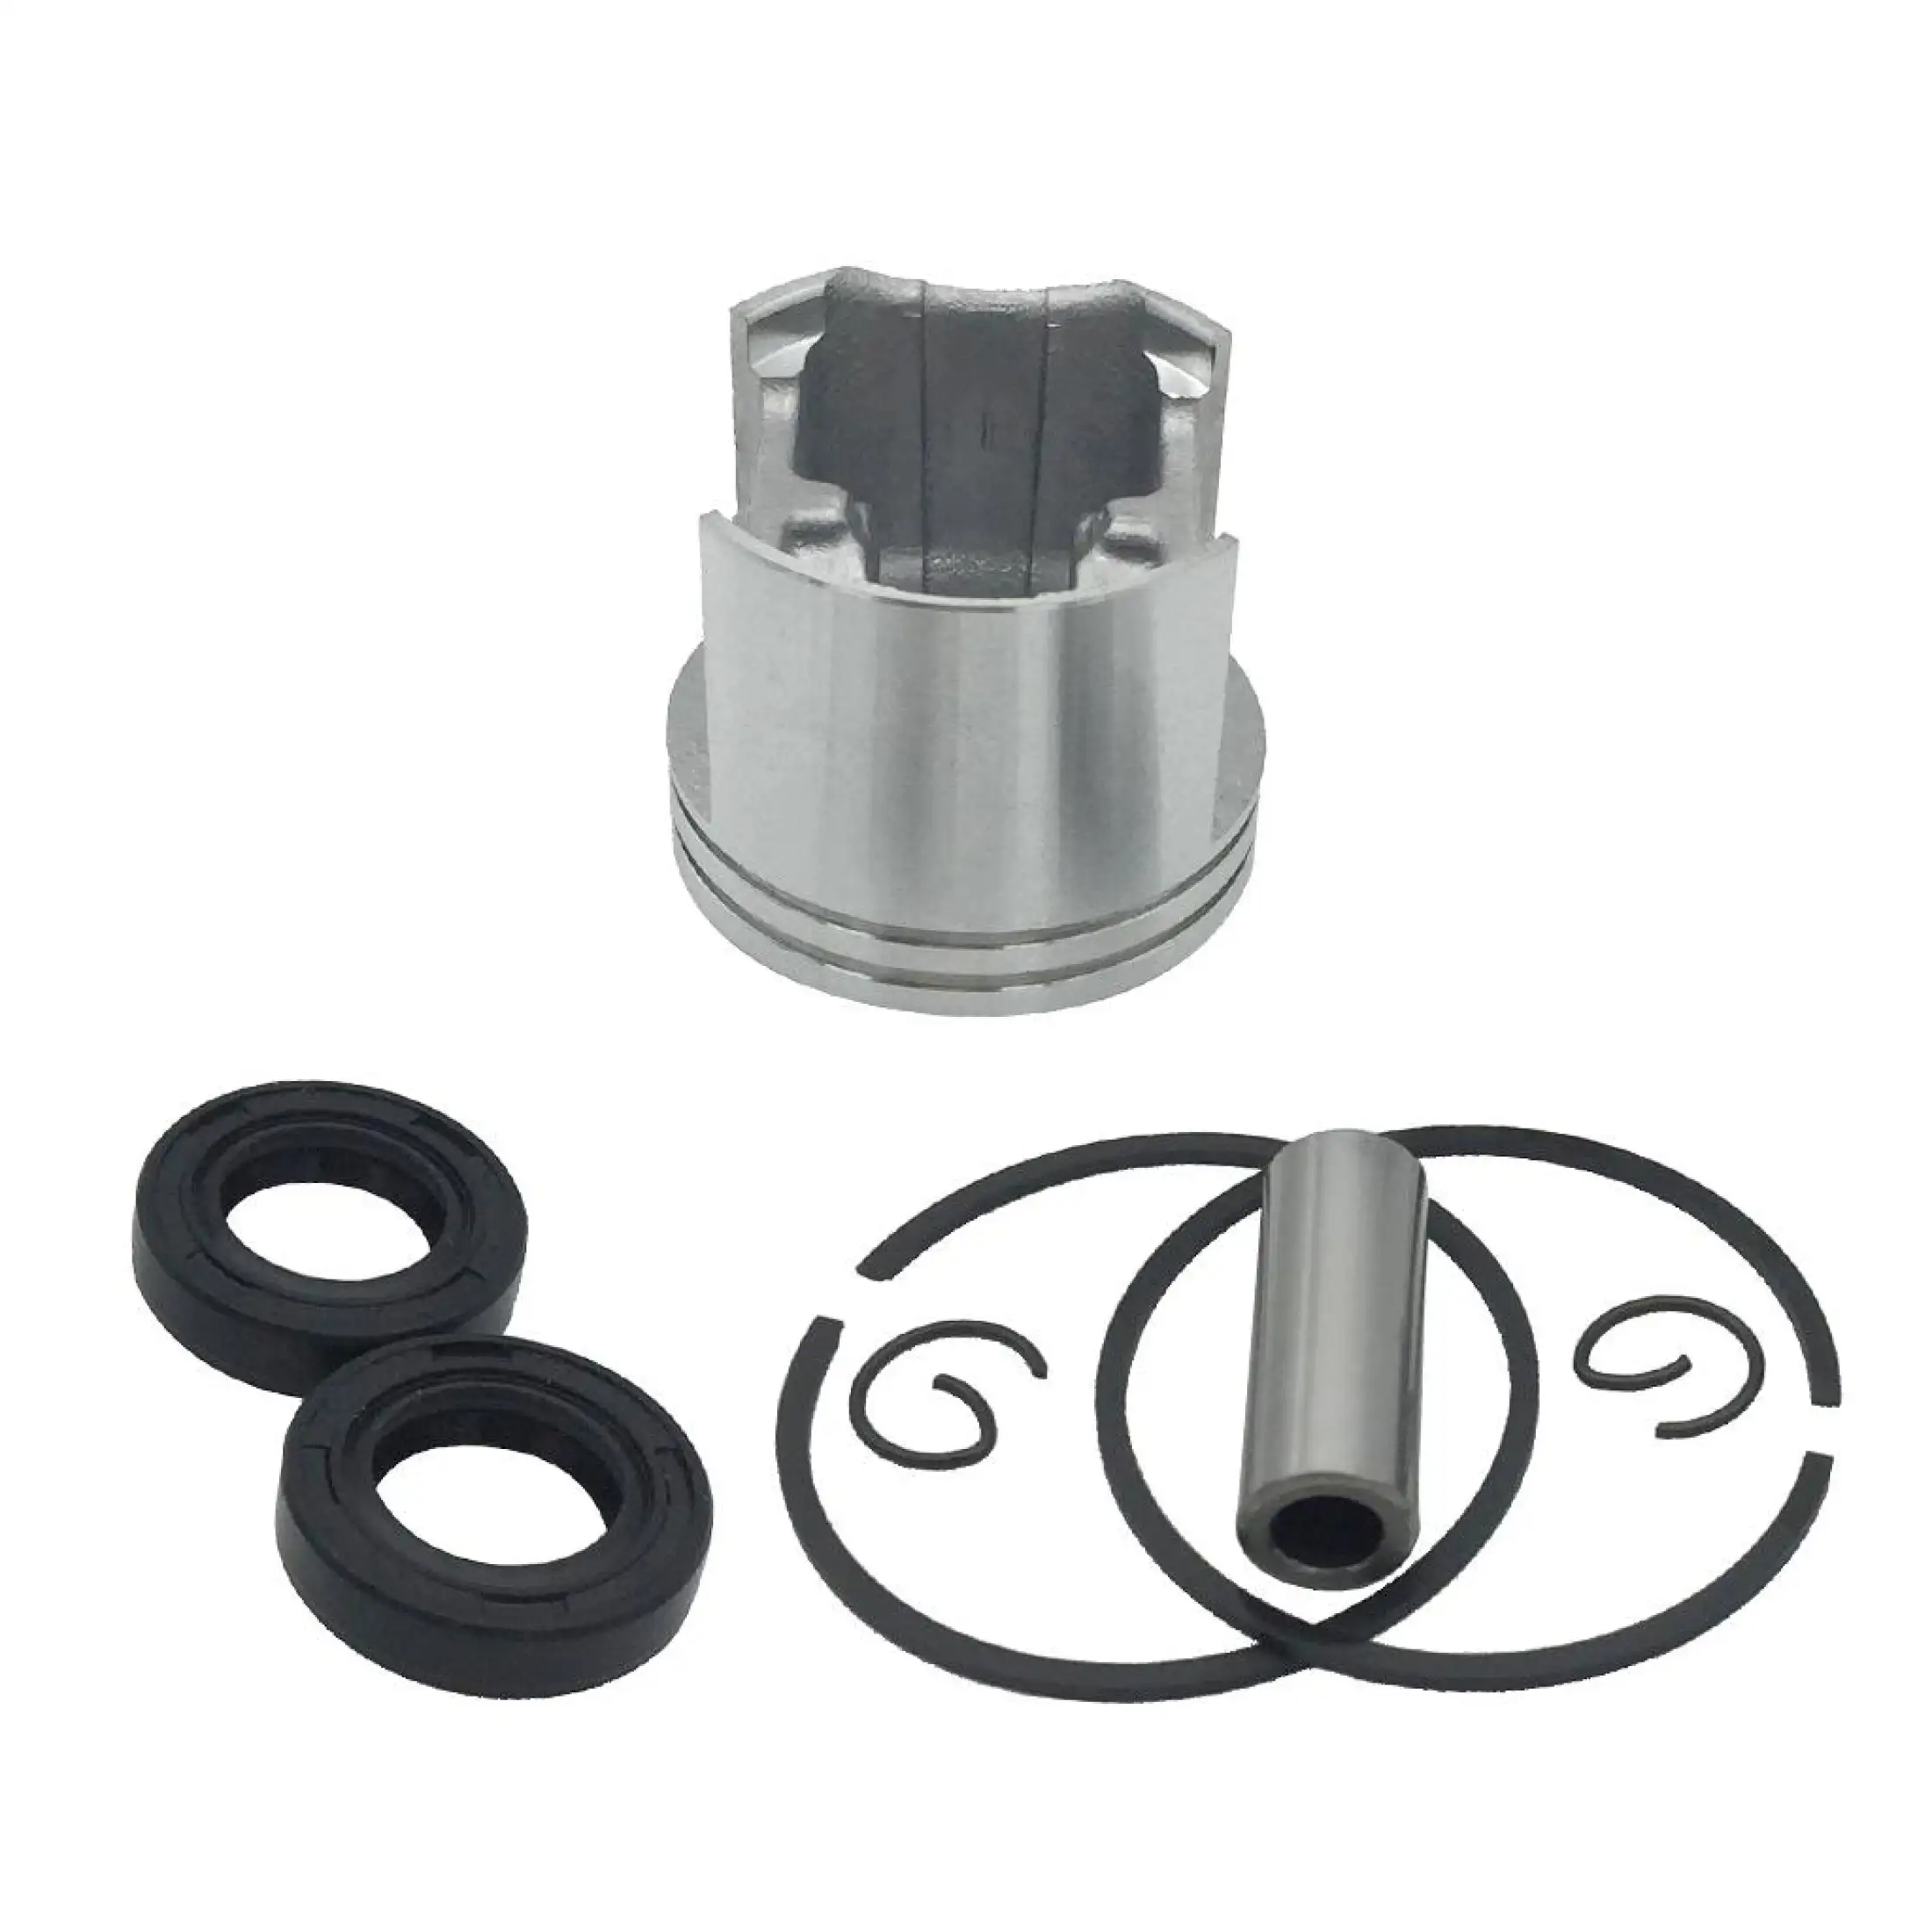 New 42.5mm Piston &Ring Kit for Stihl 025 023 MS250 MS230 Chainsaw Part